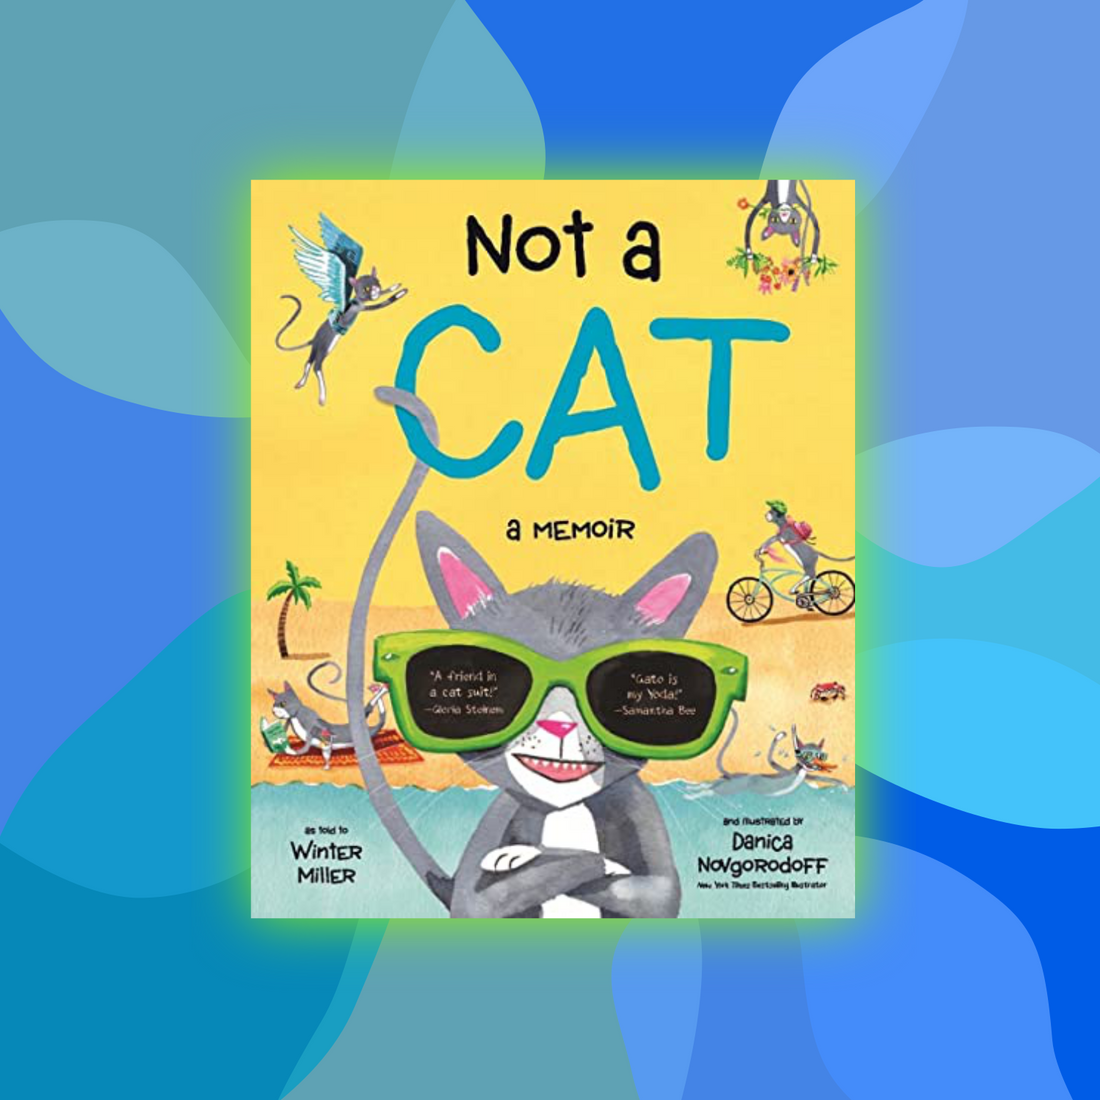 "Not a Cat" Author Winter Miller at Boswell's Books, June 18th!